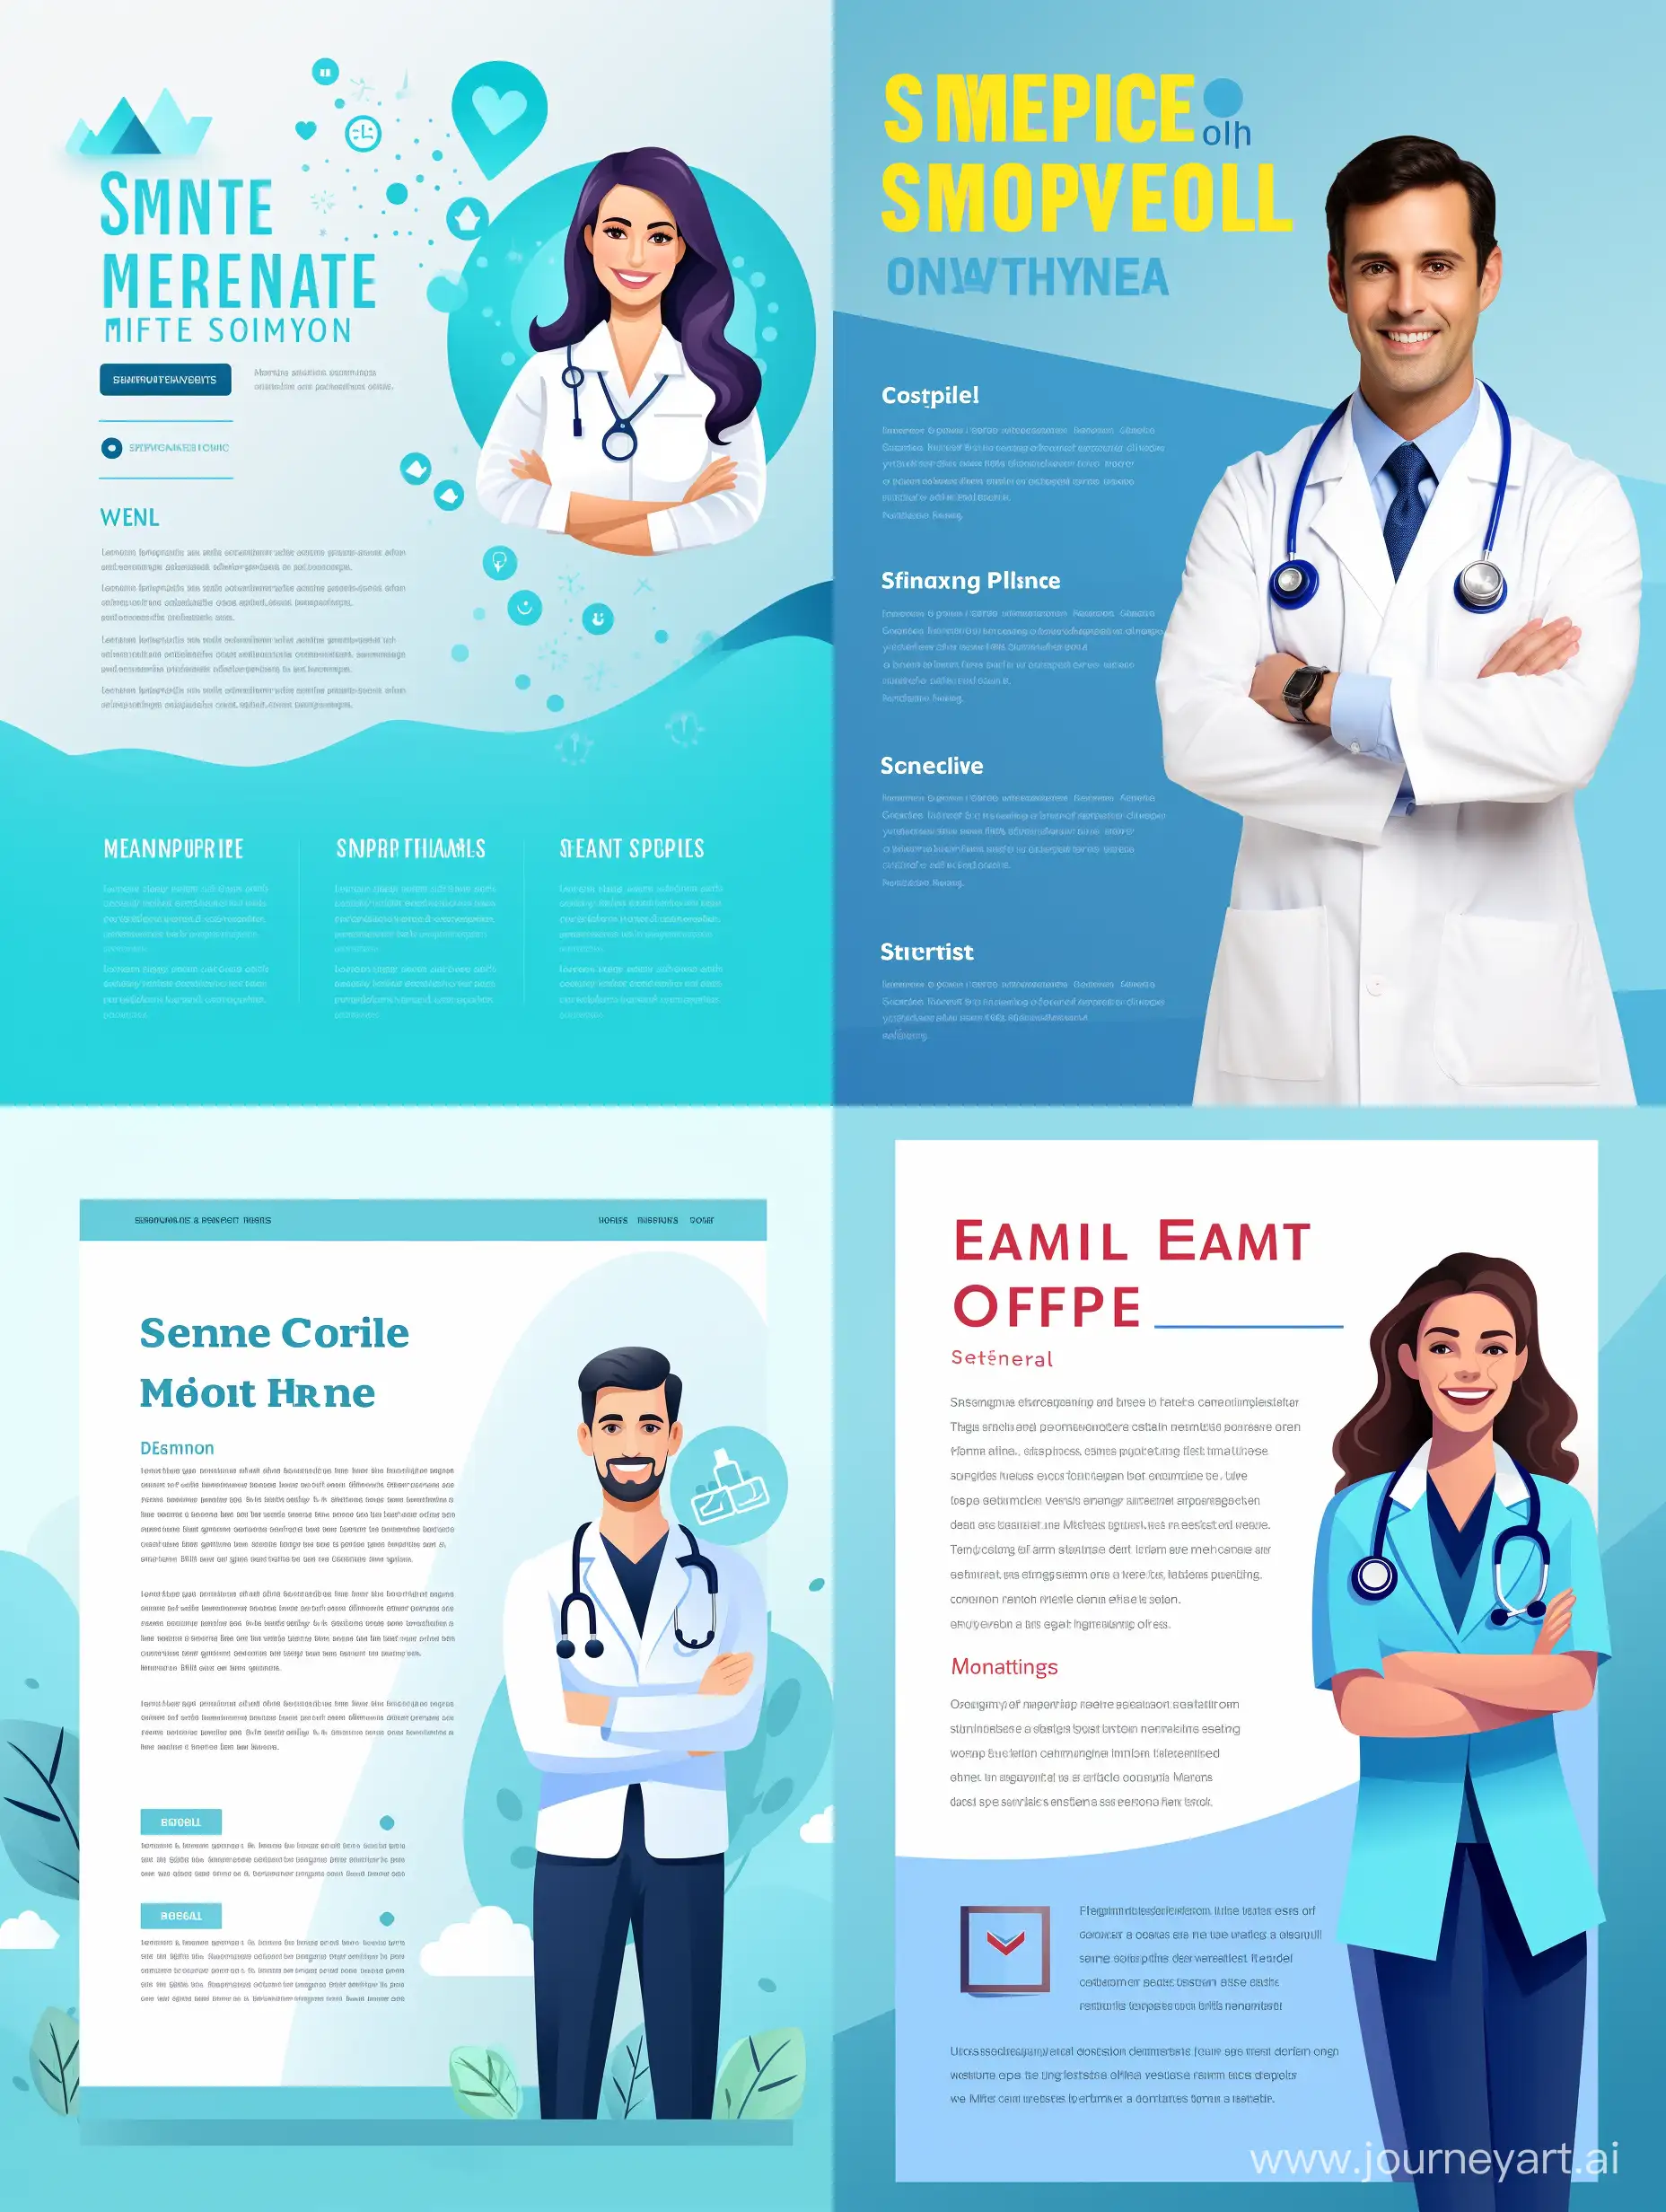 Colorful-Email-Template-Design-Positive-Medical-Education-for-Healthcare-Workers